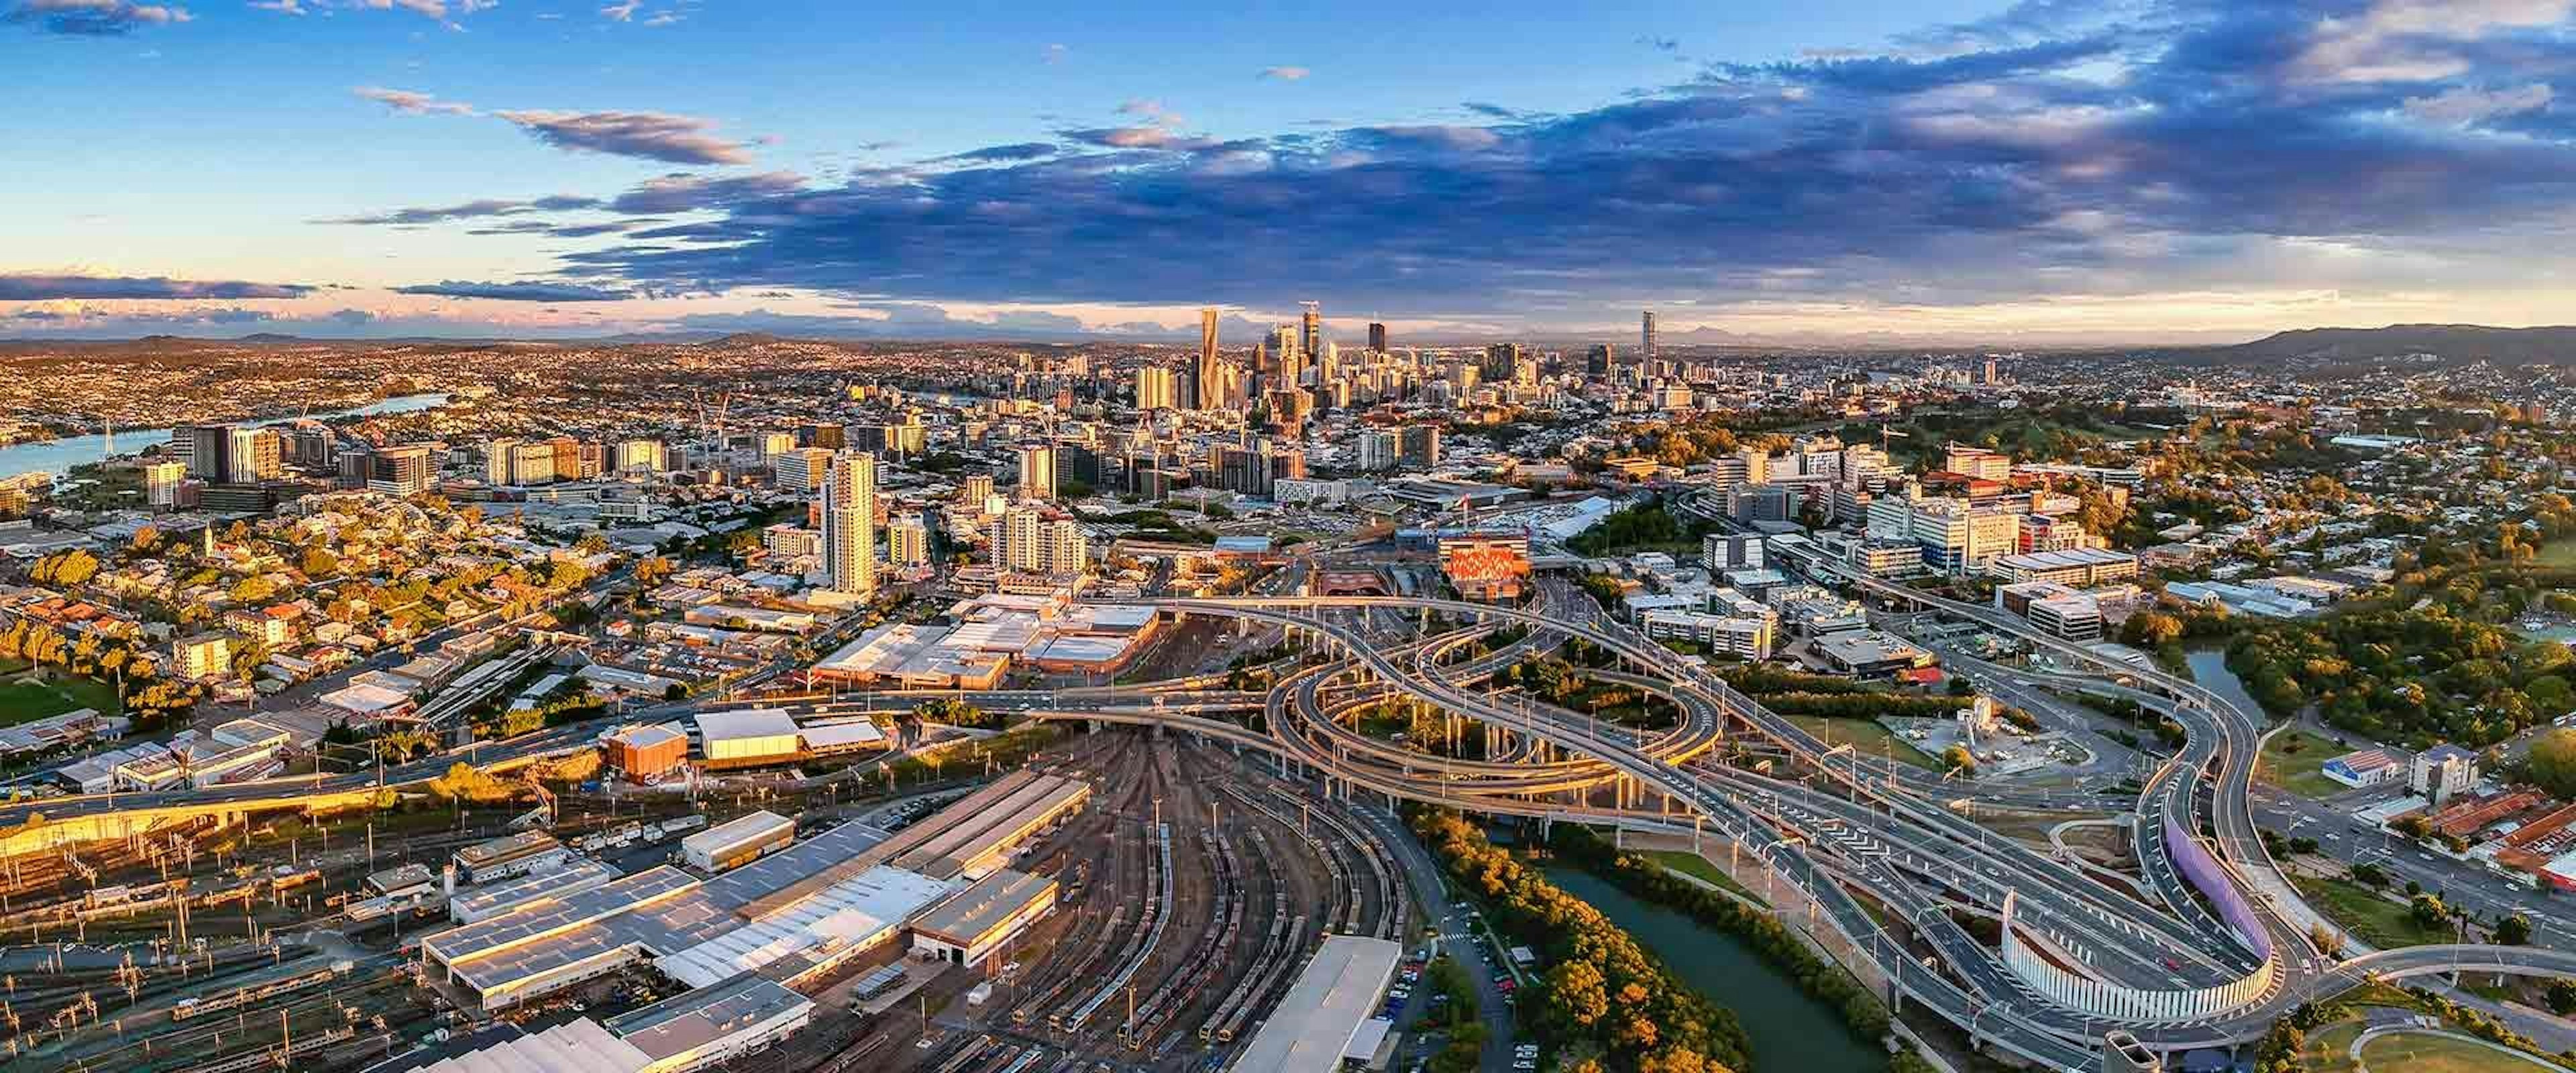 Brisbane city skyline with roads and train stations